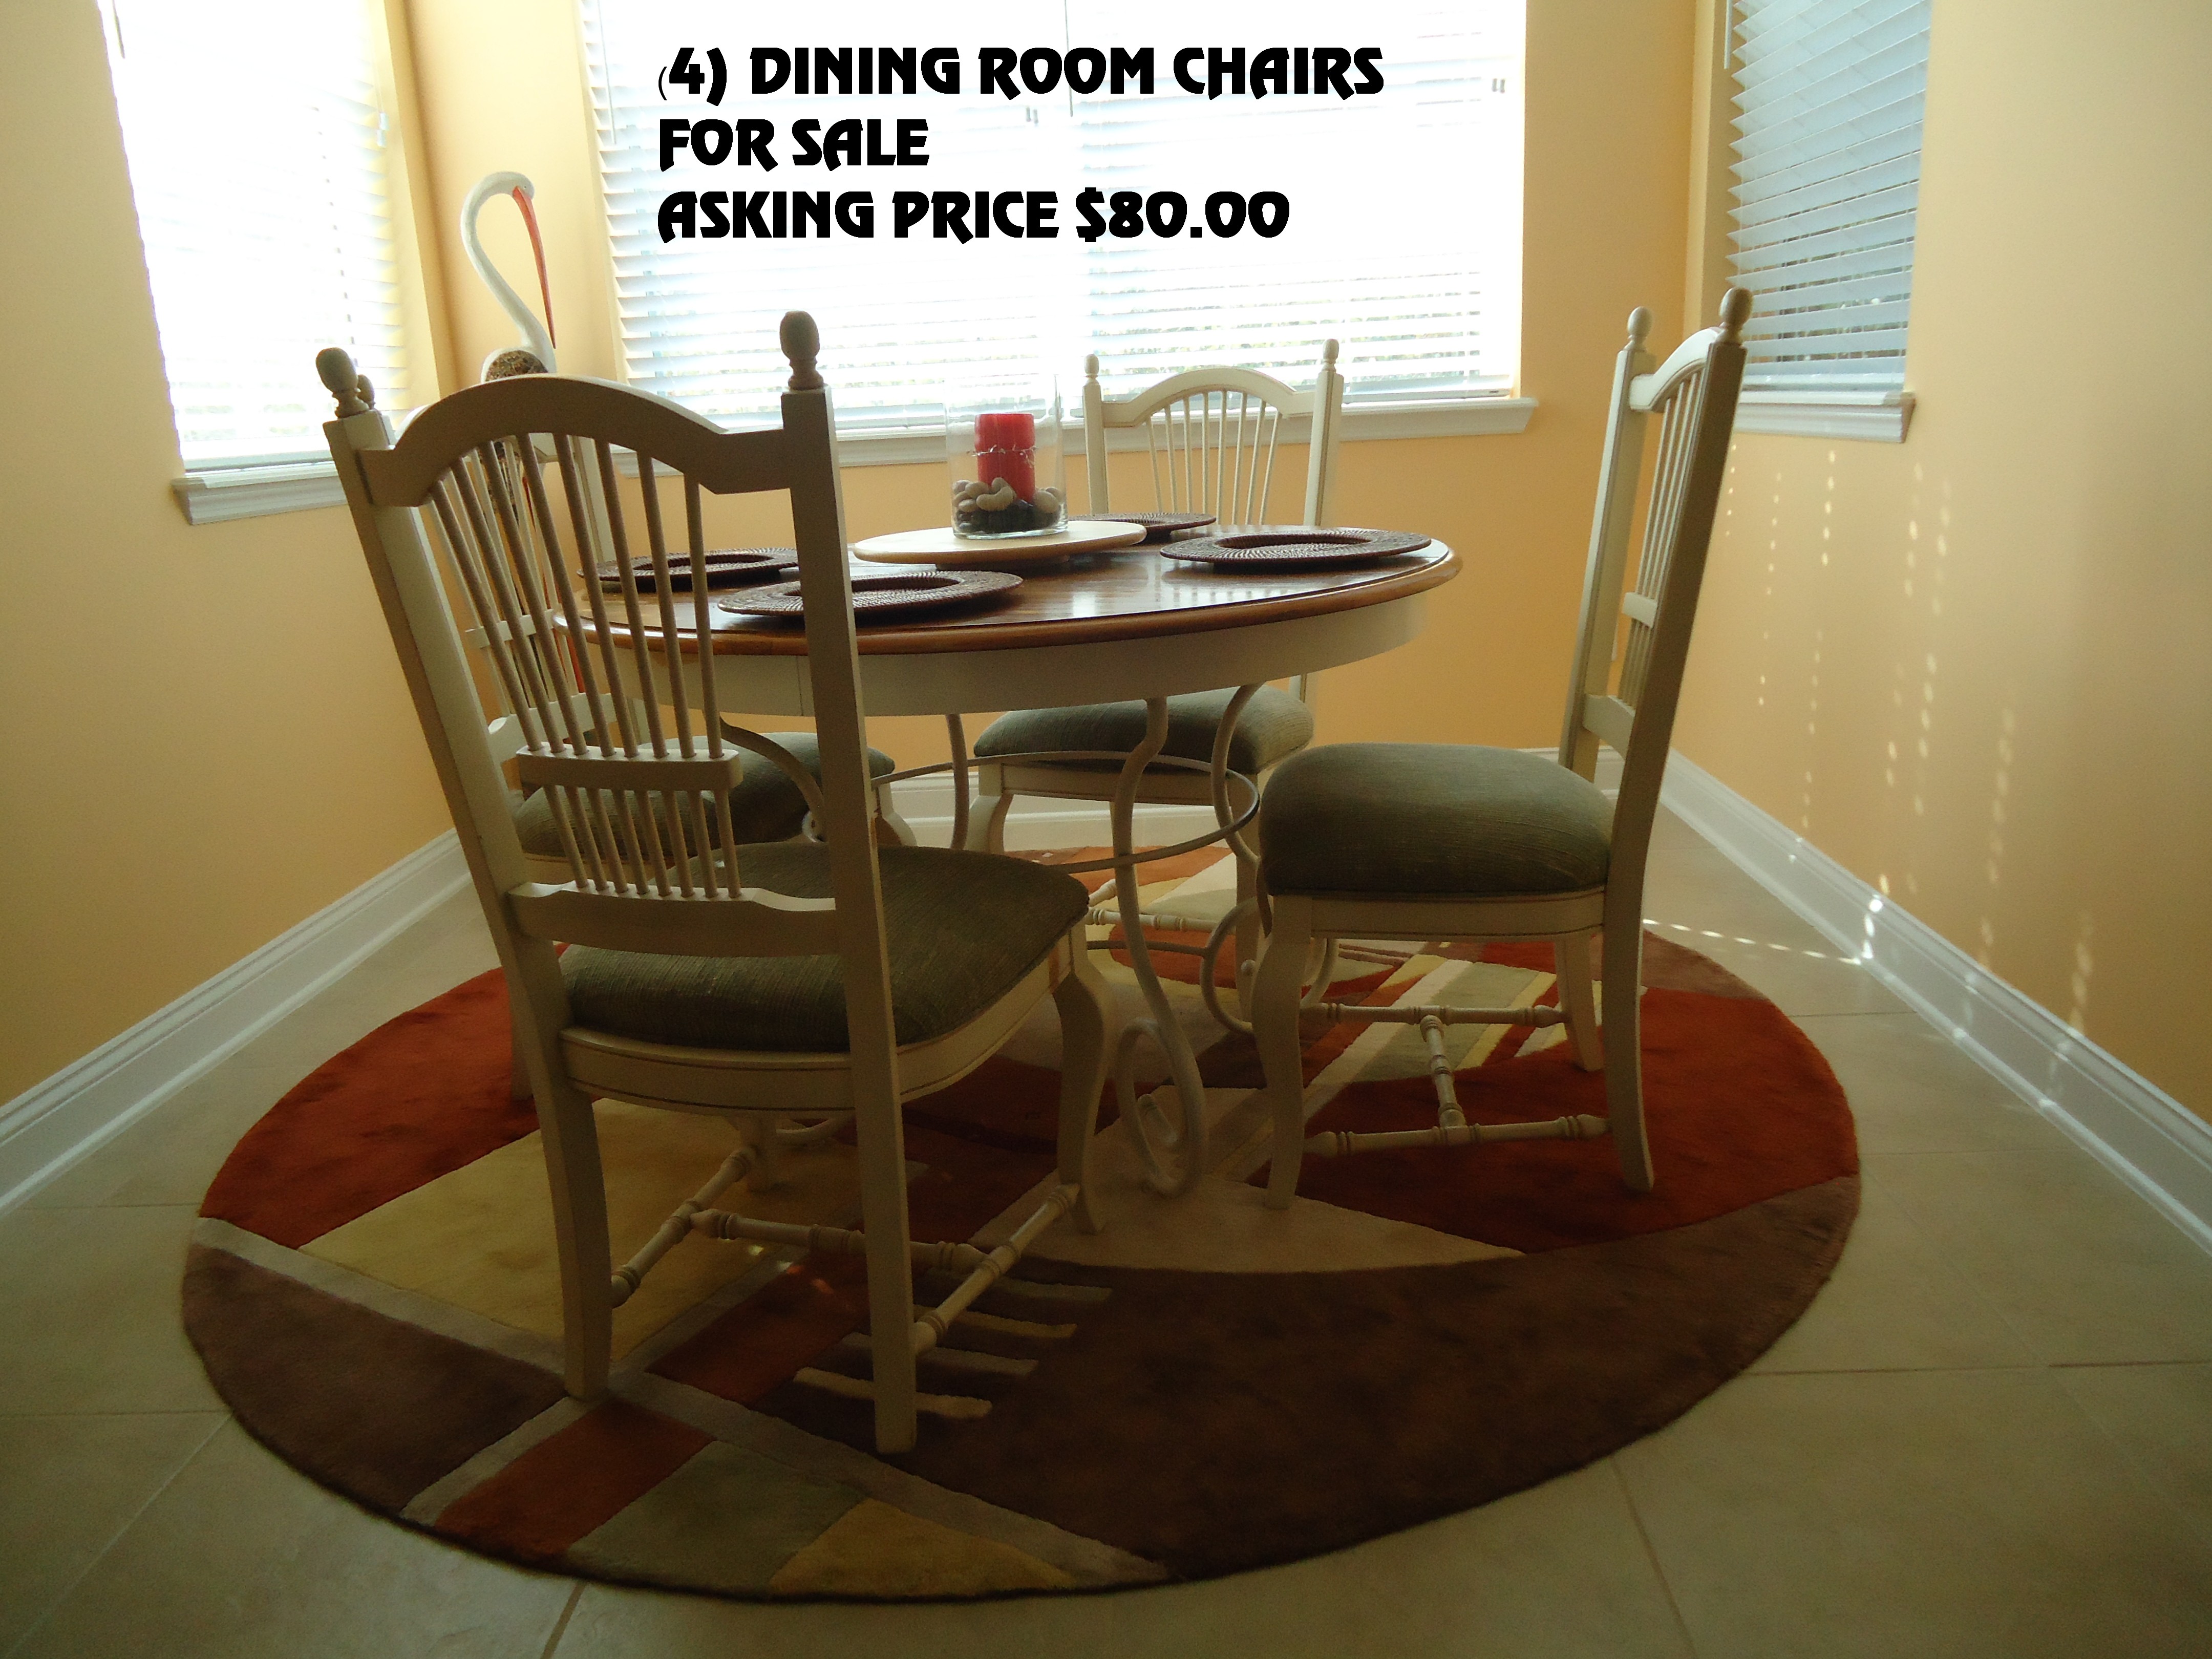 Buy Dining Room Chairs
Furniture ? Modern | Contemporary dining